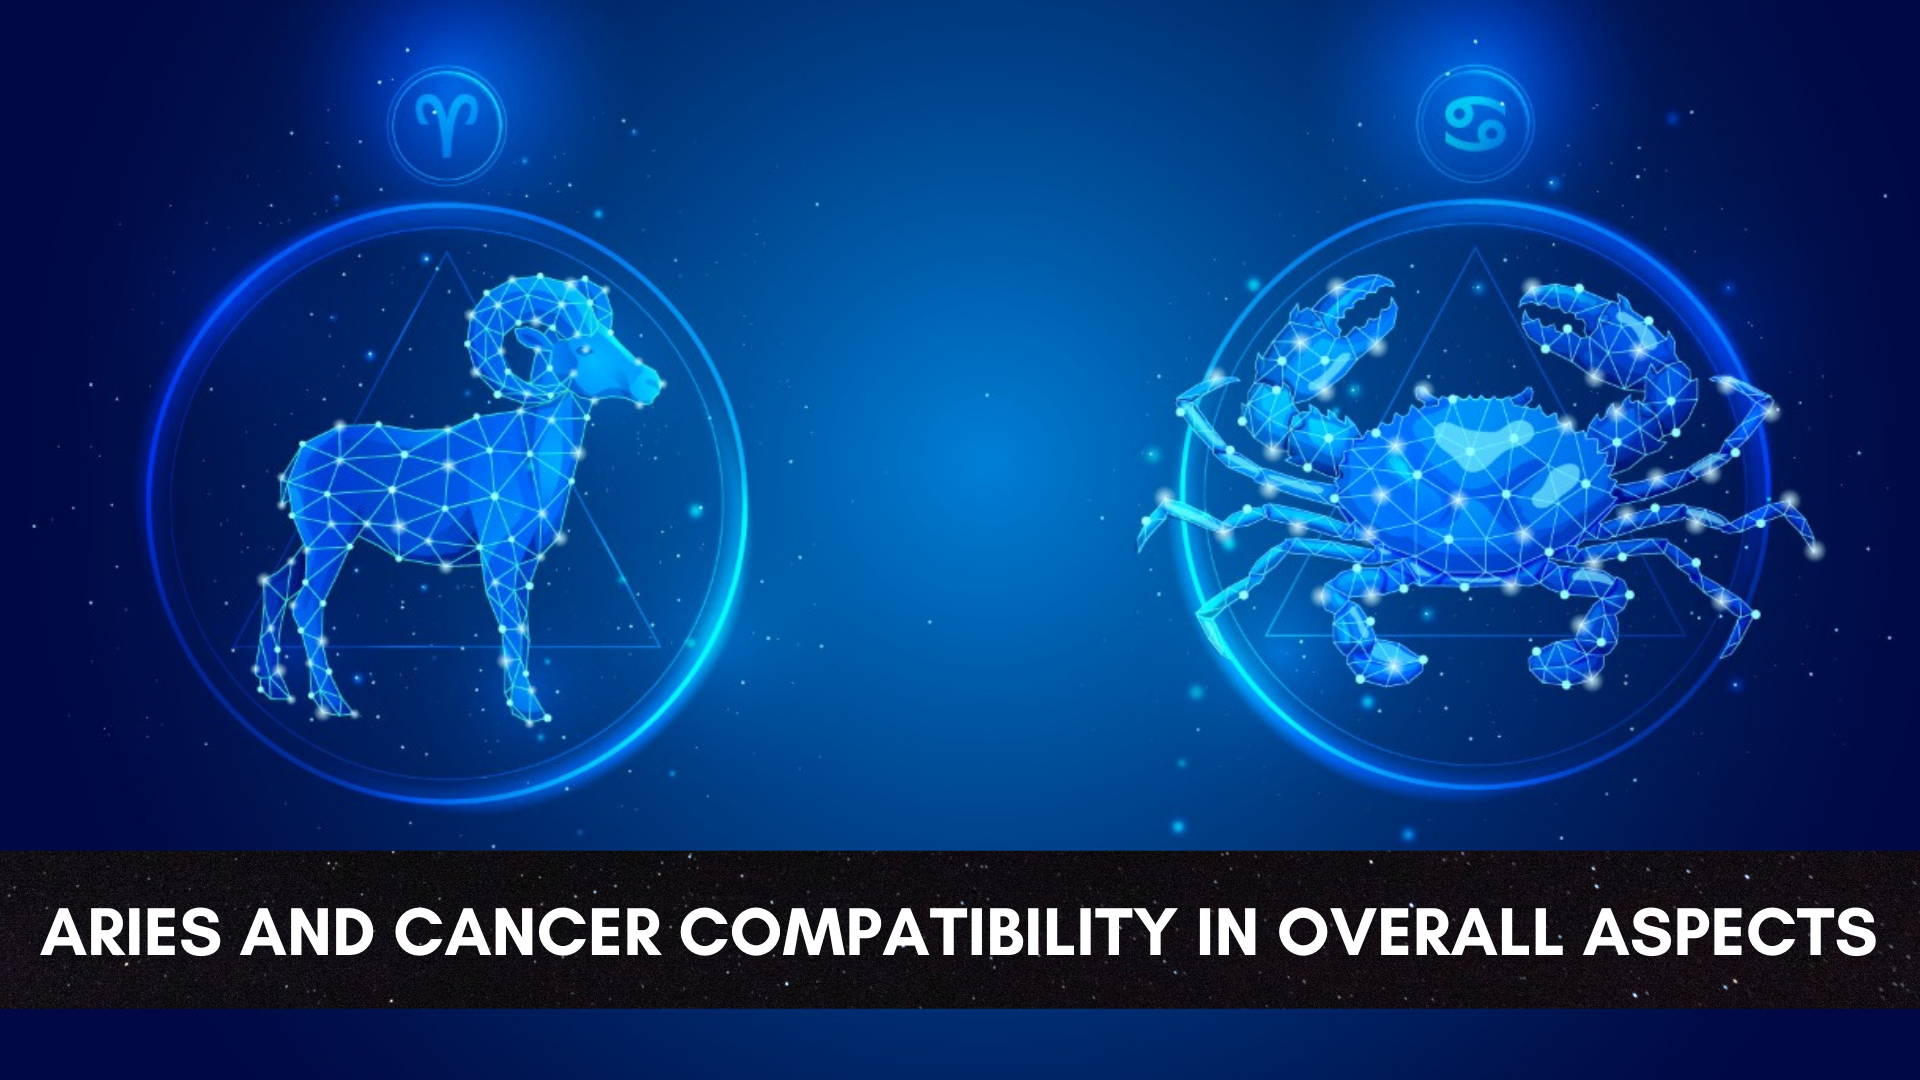 Aries and cancer zodiac sign in blue background and words Aries And Cancer Compatibility In Overall Aspects